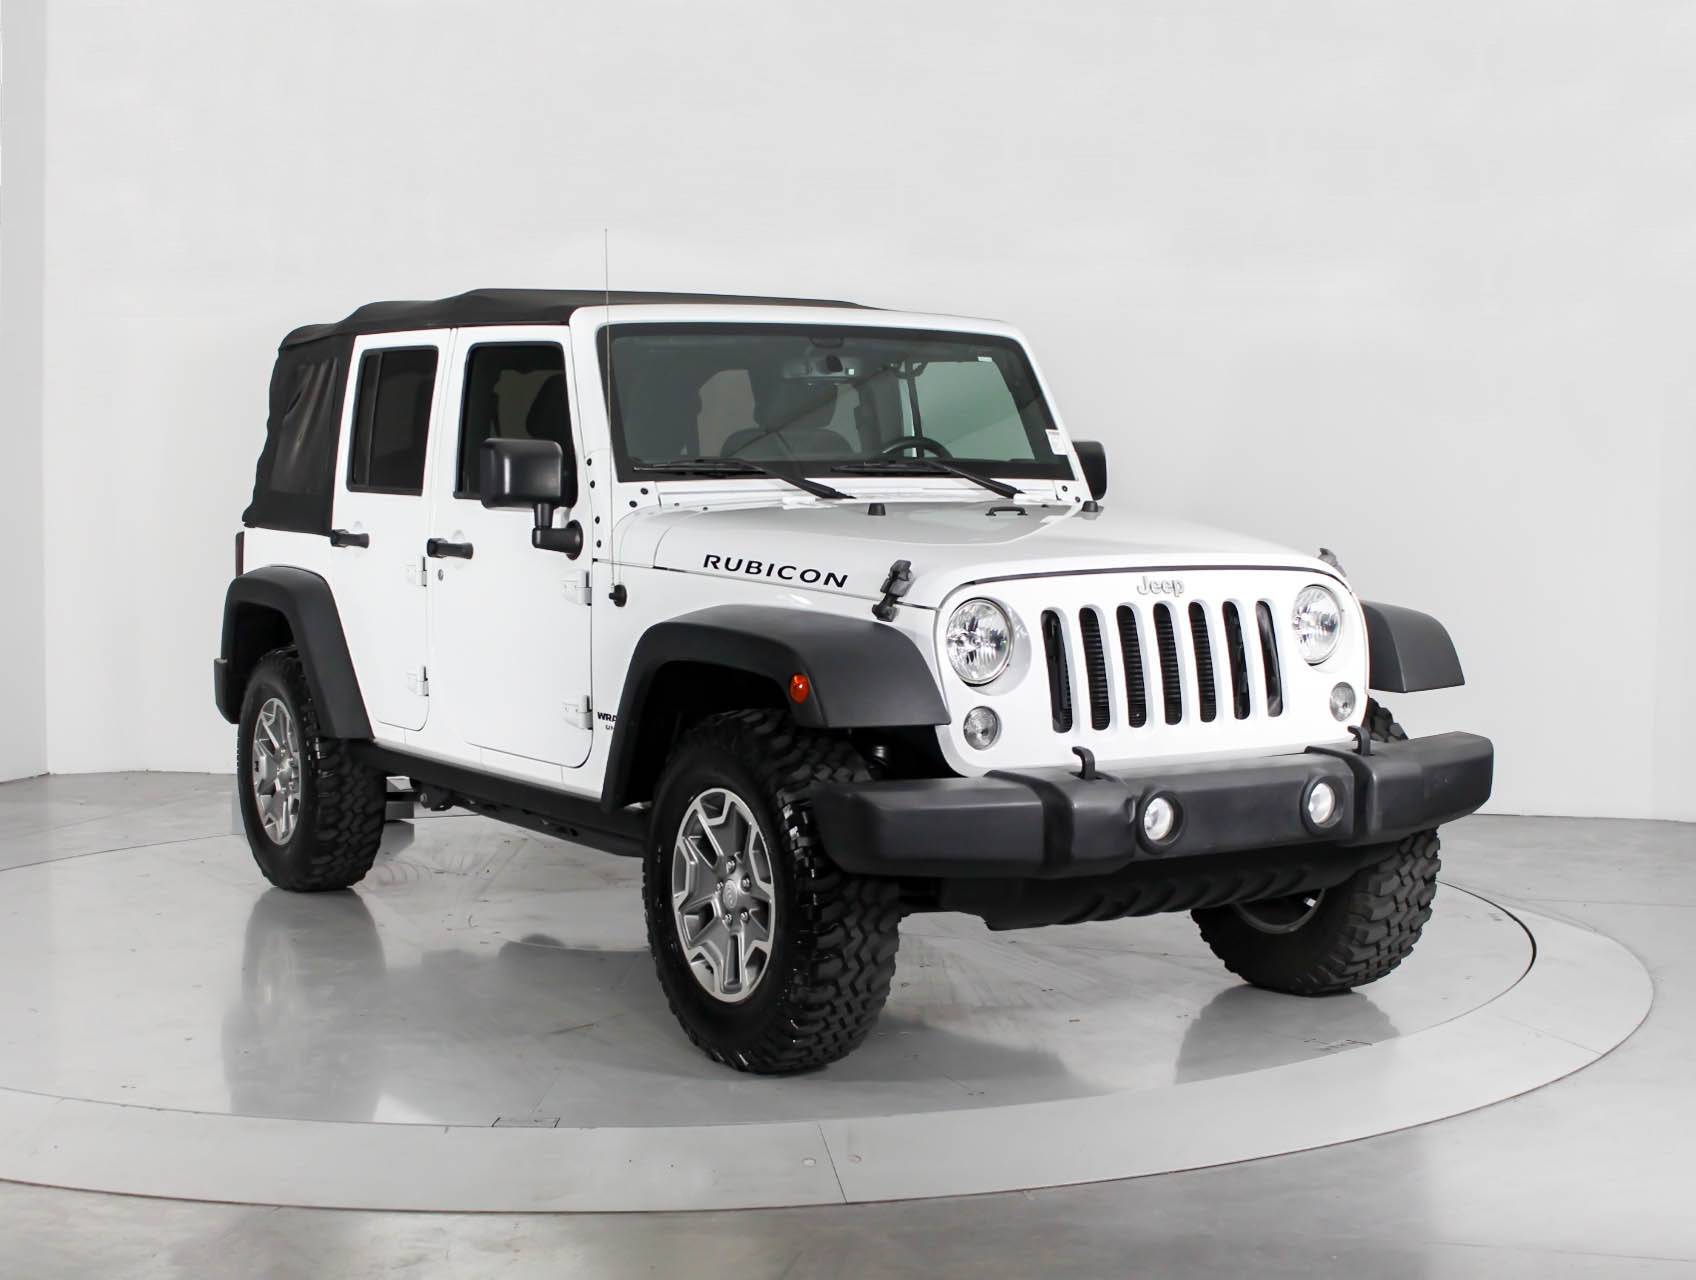 Florida Fine Cars - Used JEEP WRANGLER UNLIMITED 2015 HOLLYWOOD RUBICON